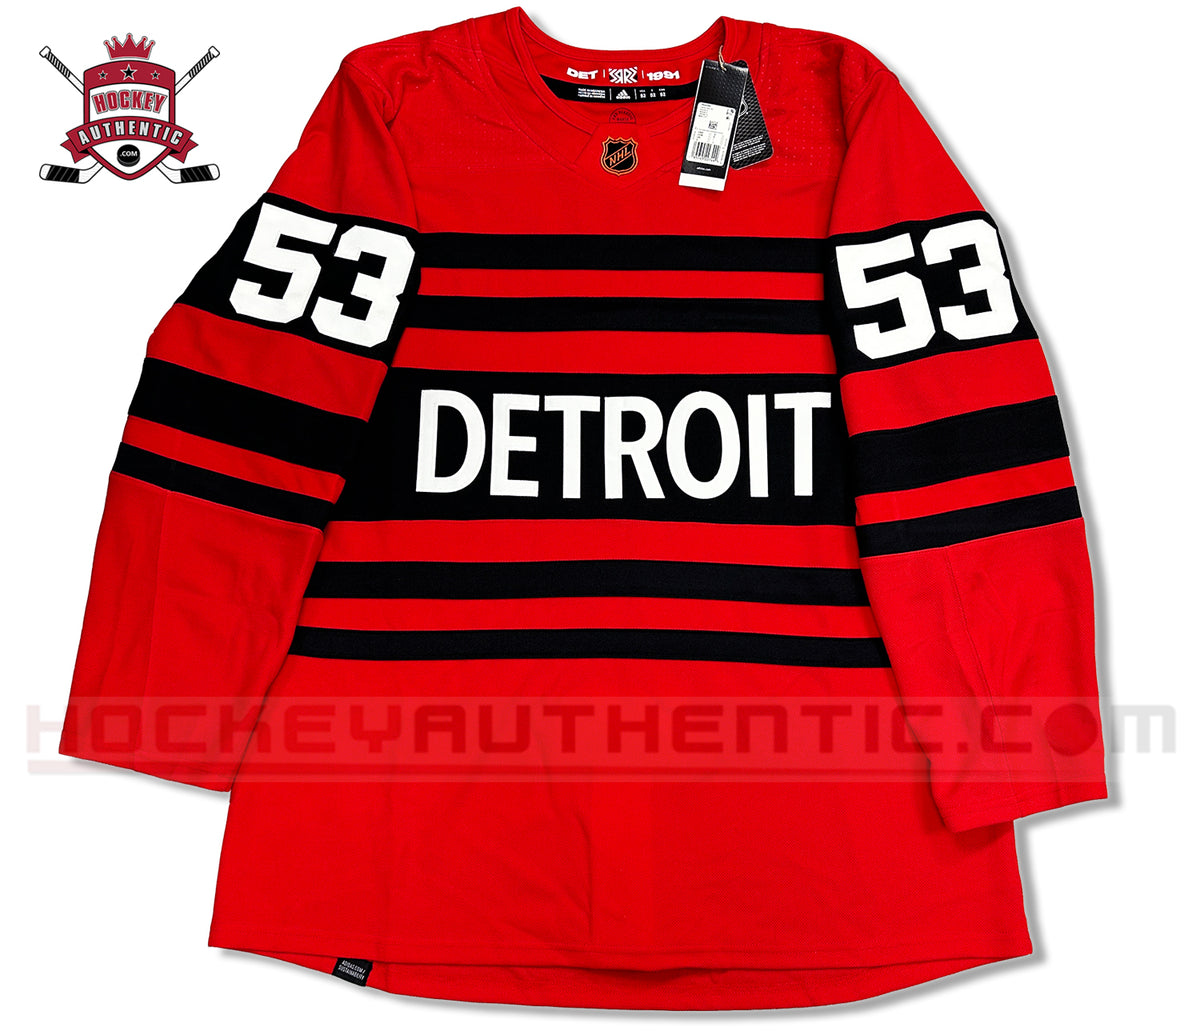 Petition · Change the Detroit Red Wings Adidas Reverse Retro Jersey Design  ·